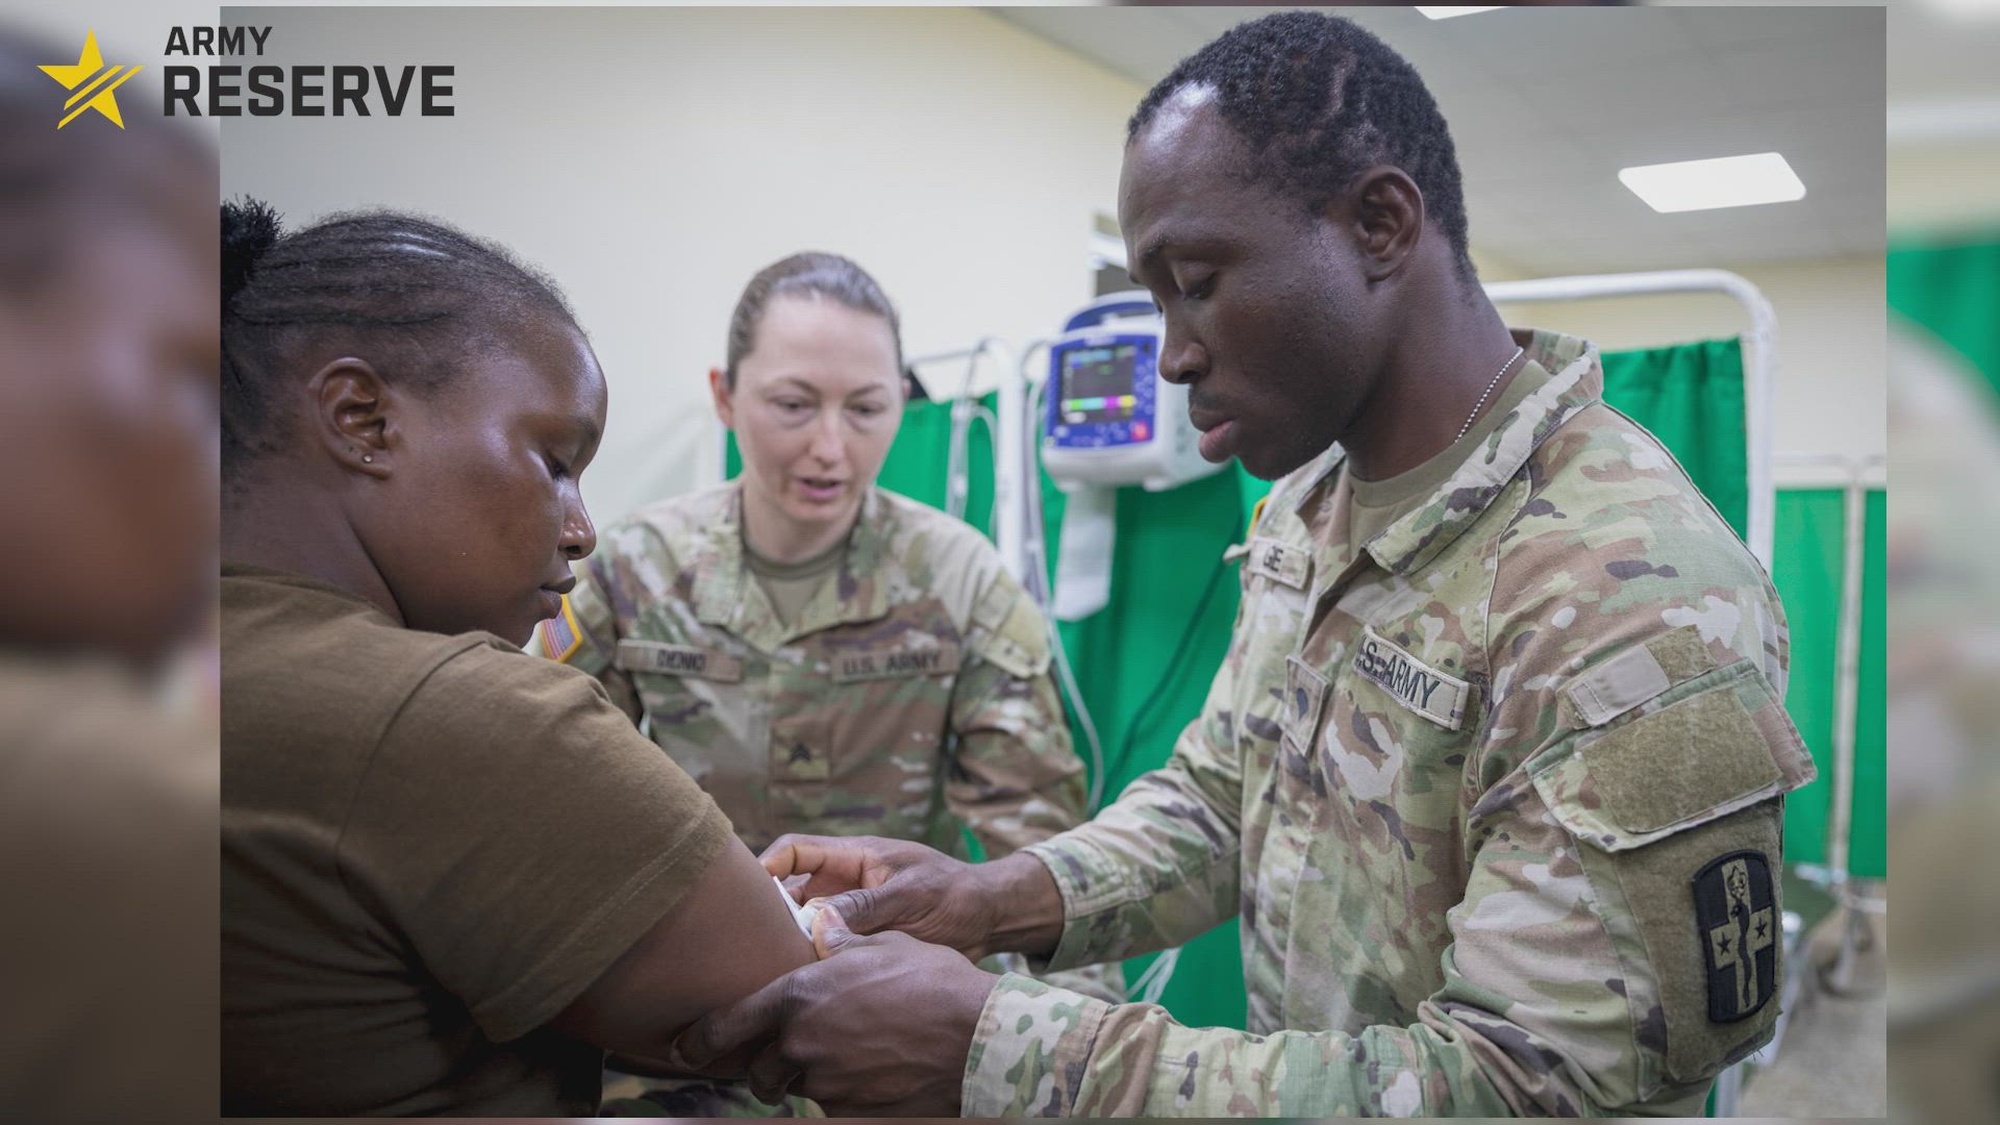 U.S. Army Reserve Spc. Israel Osagie, discusses why he joined the Army Reserve on Feb. 29, 2024, in Nanyuki, Kenya.